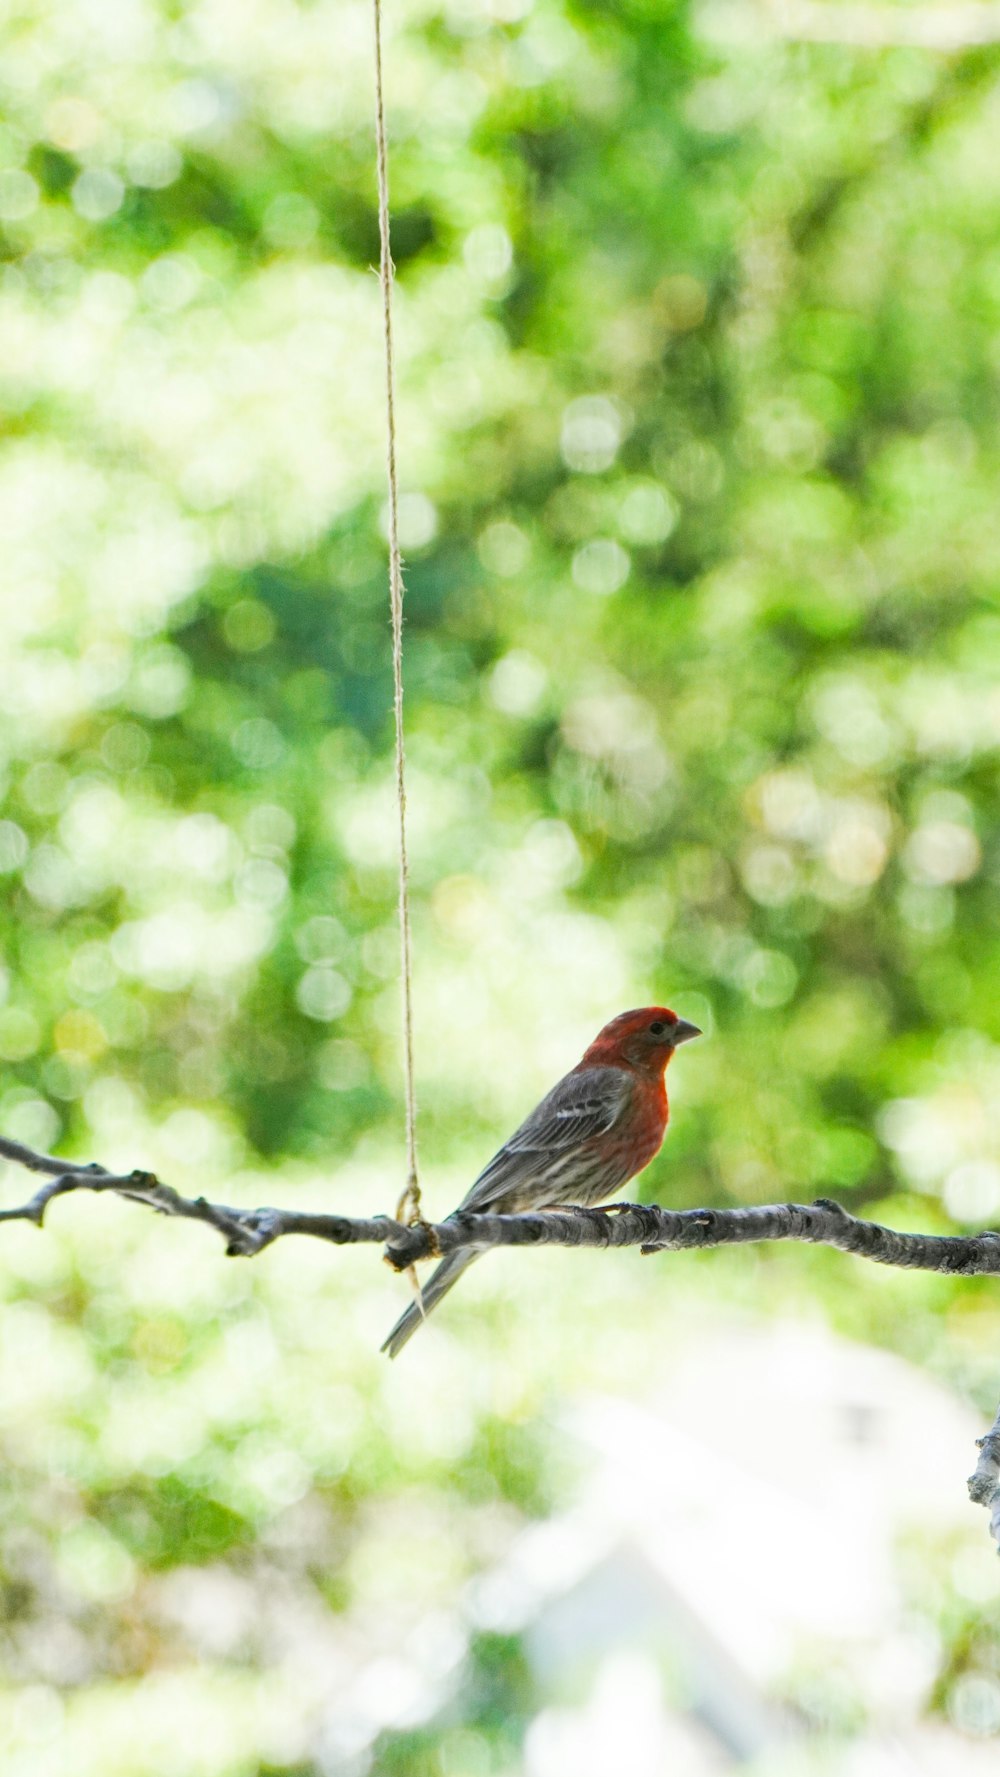 a small red bird perched on a tree branch